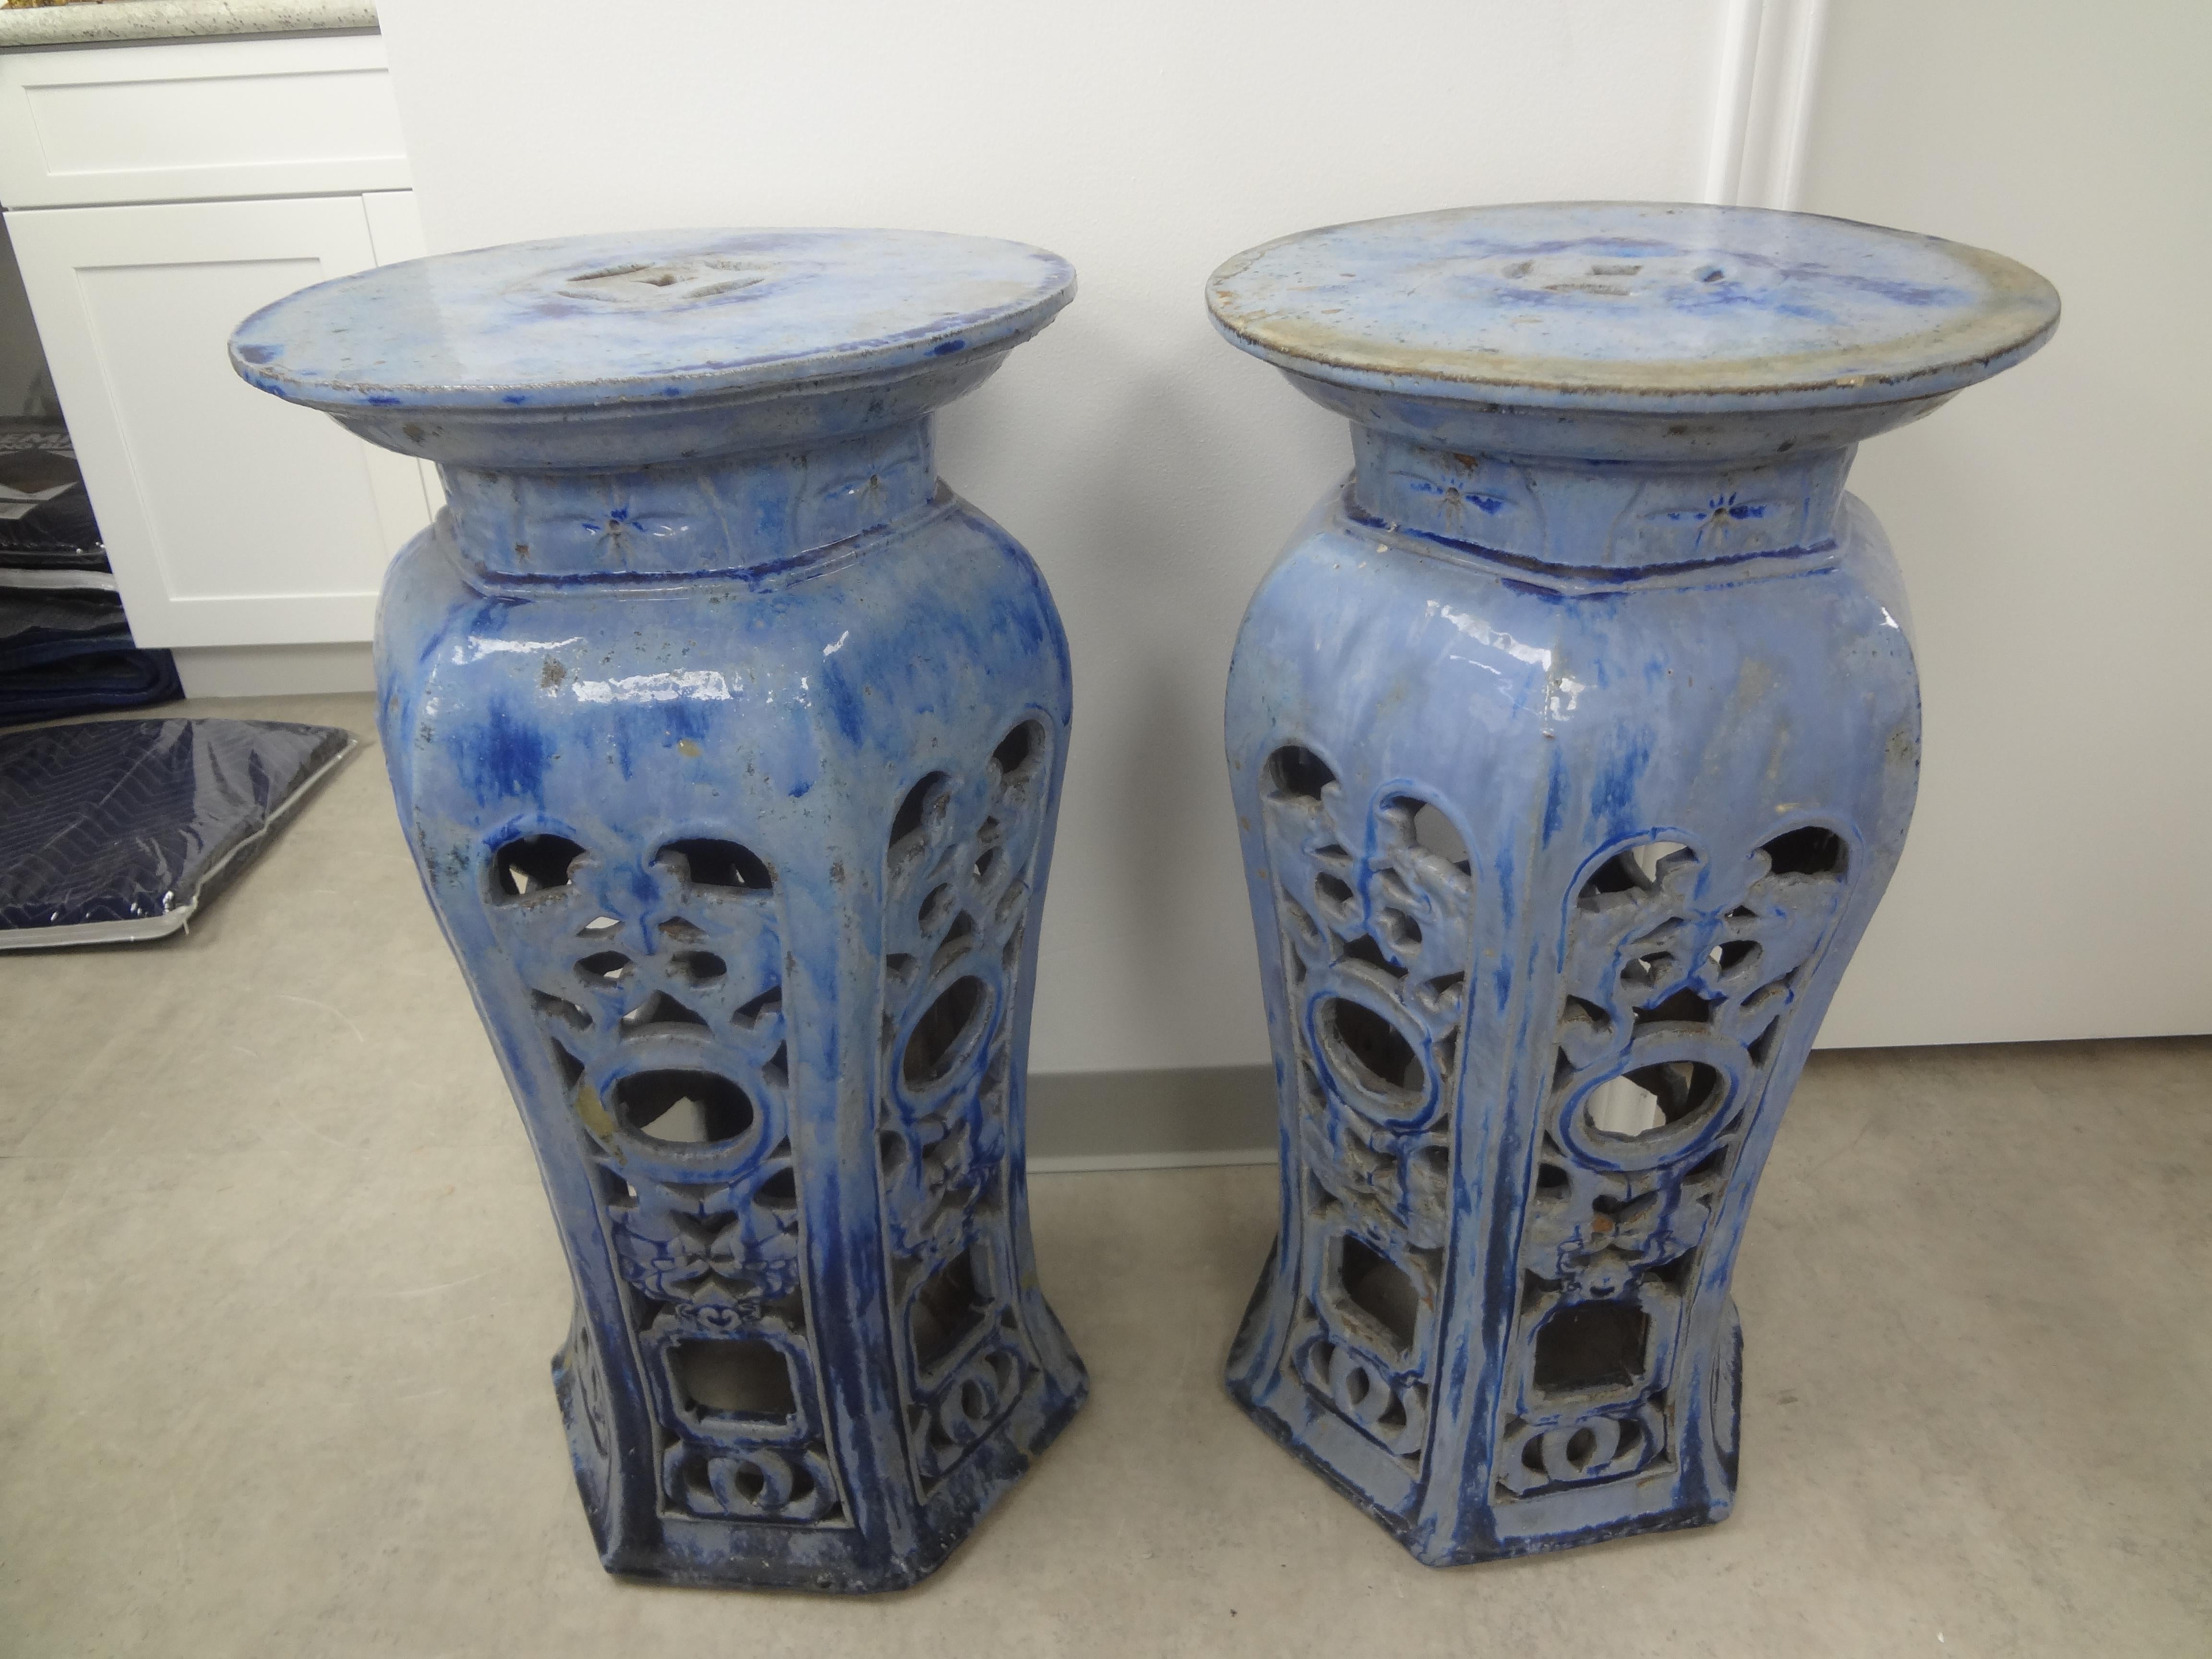 Pair of Early 20th Century Chinese Glazed Terra Cotta Pedestals or Stands For Sale 2